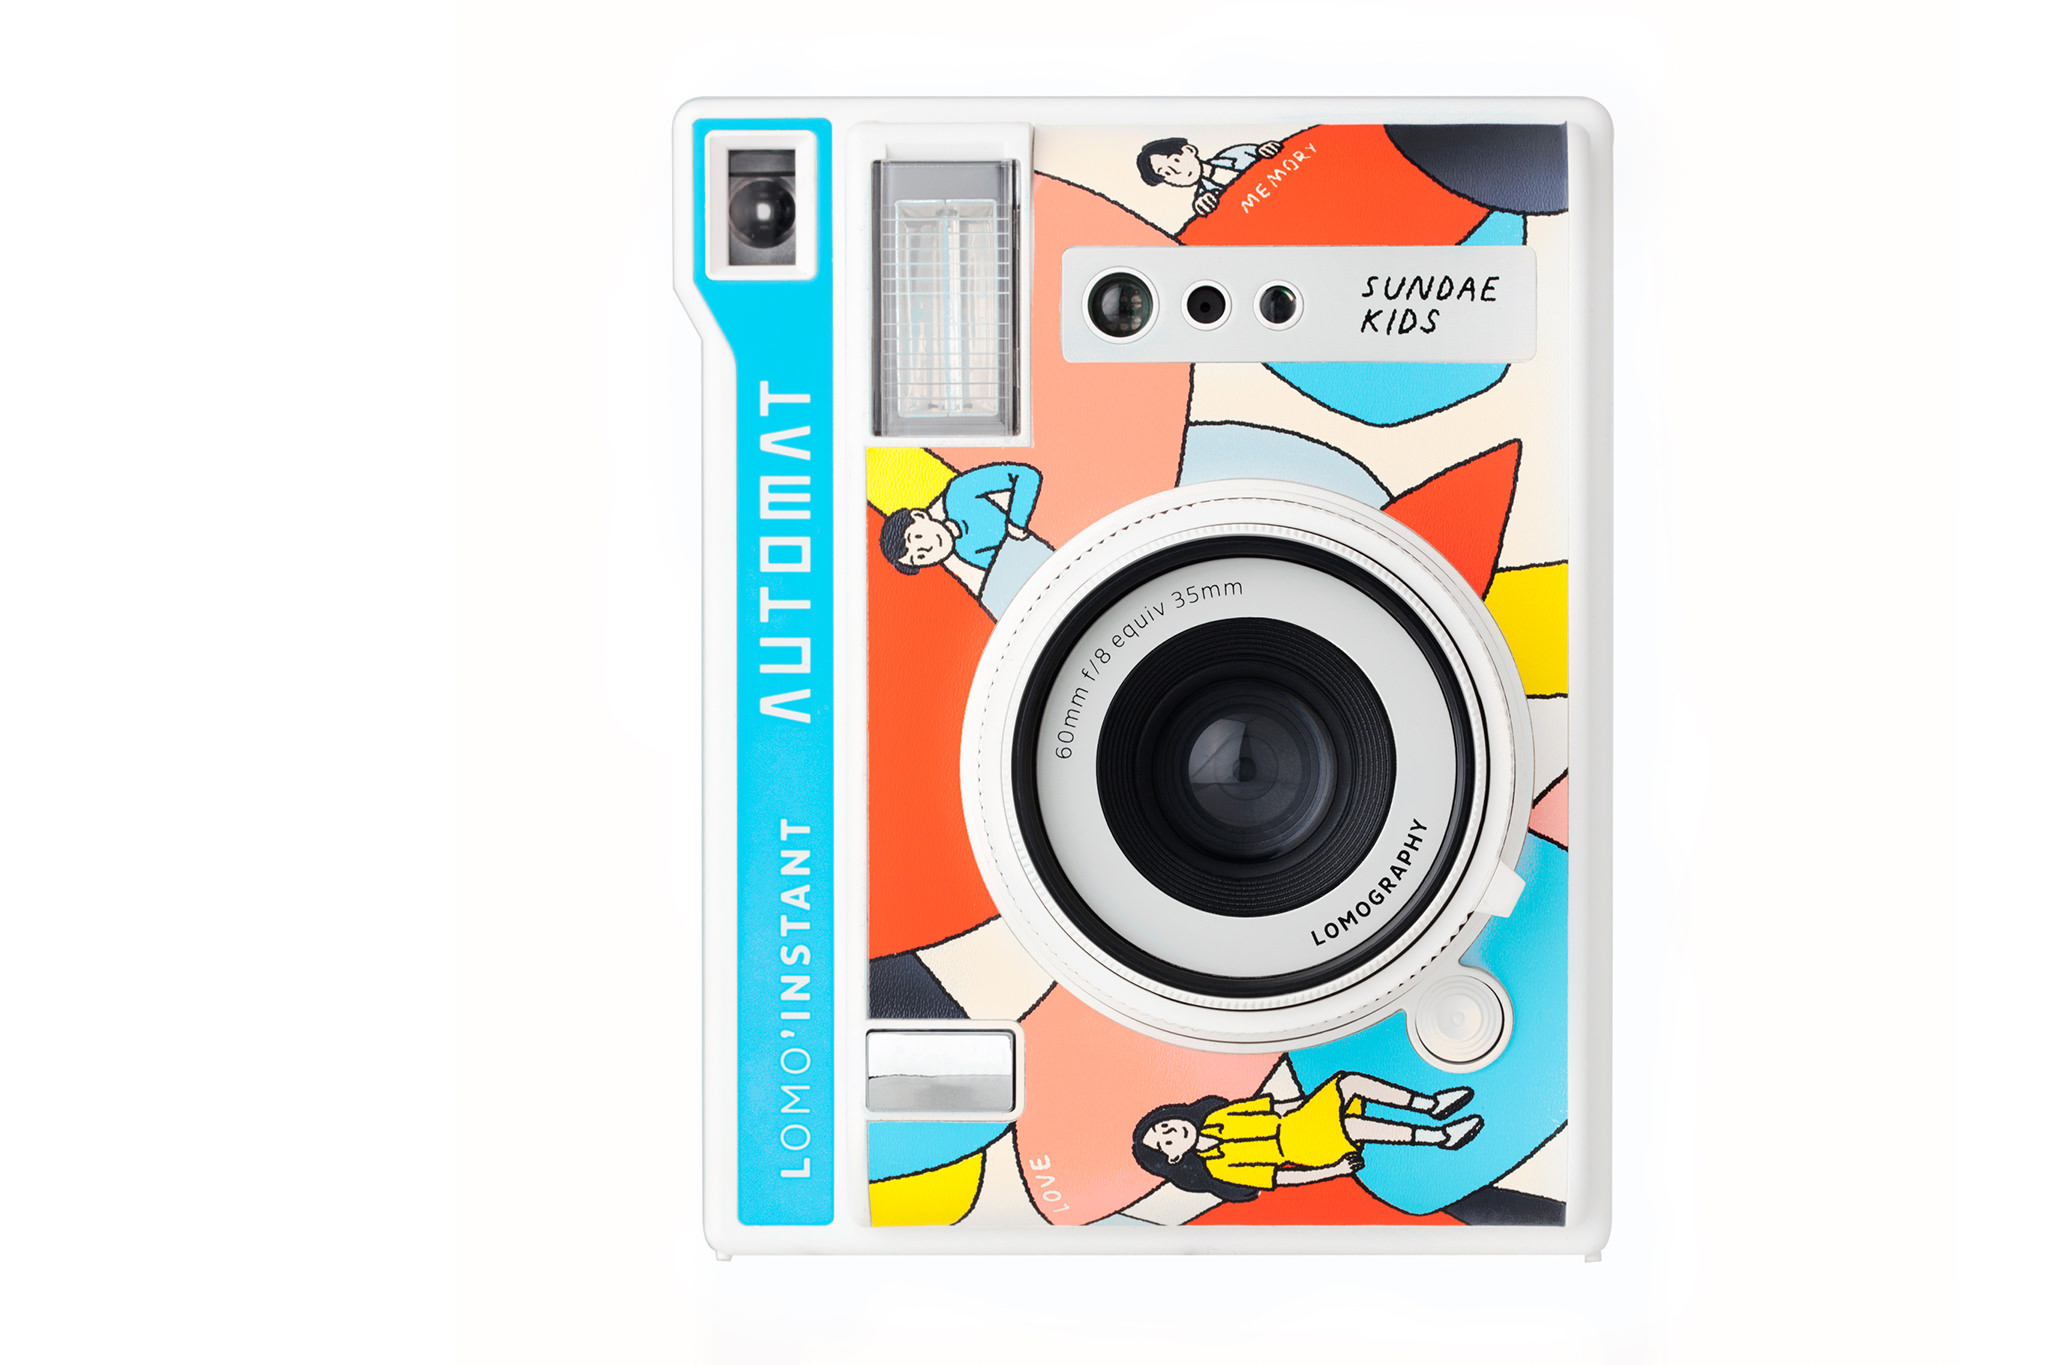 Lomo'Instant Automat Sundae Kids Edition - Learn more